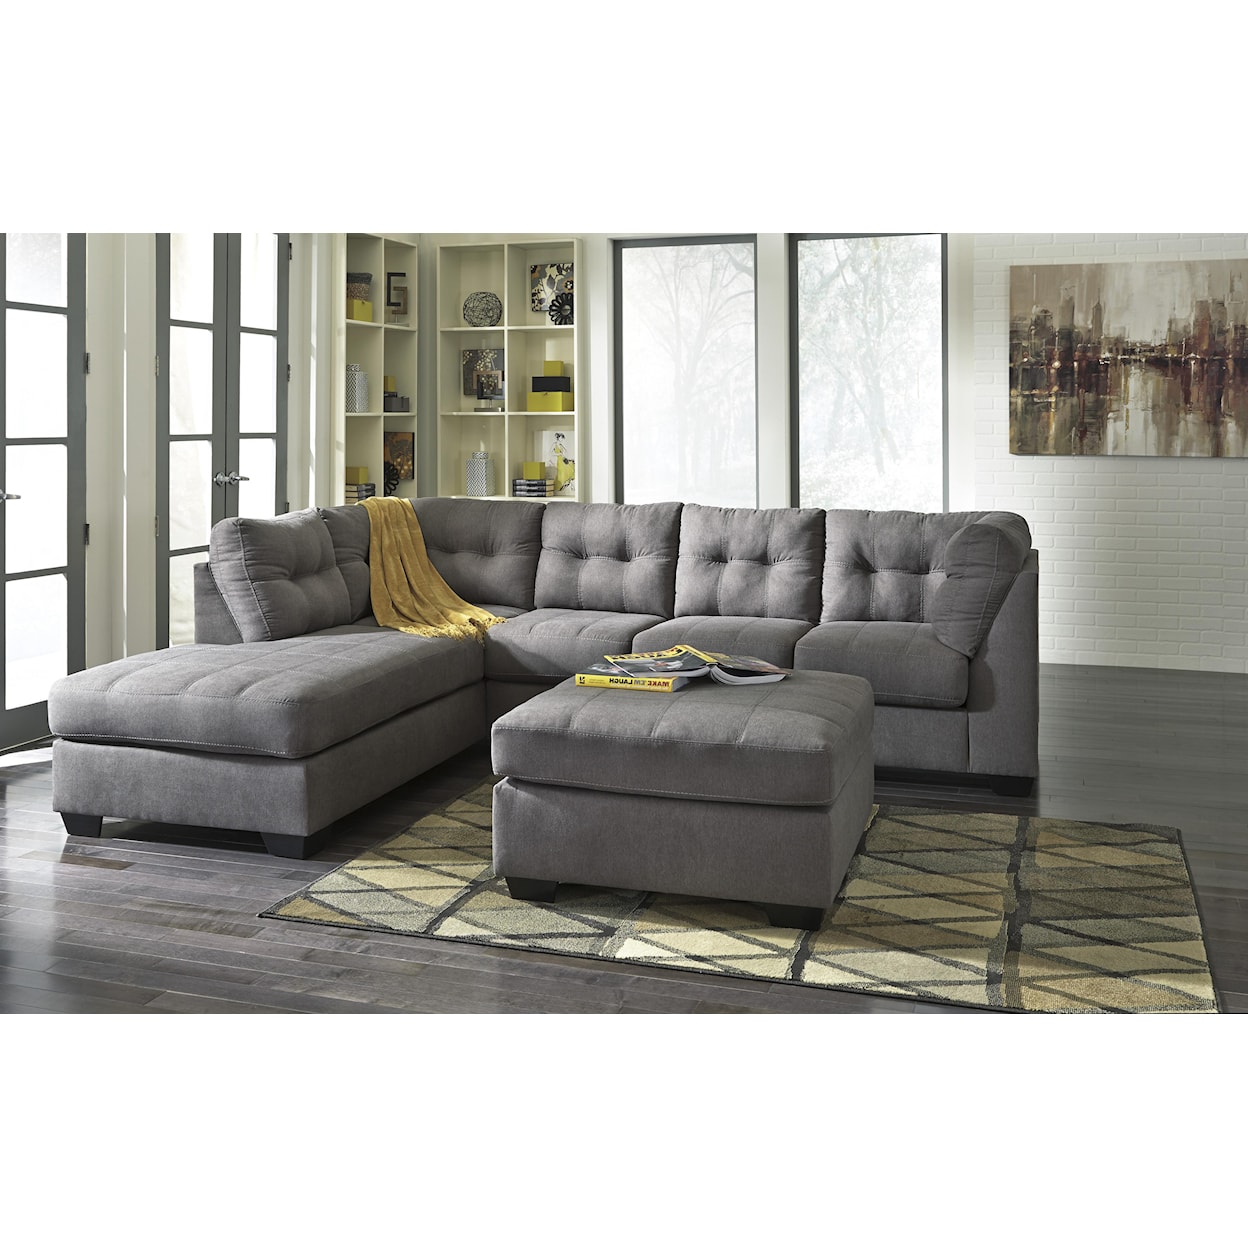 Benchcraft Maier - Charcoal 2-Piece Sectional with Left Chaise